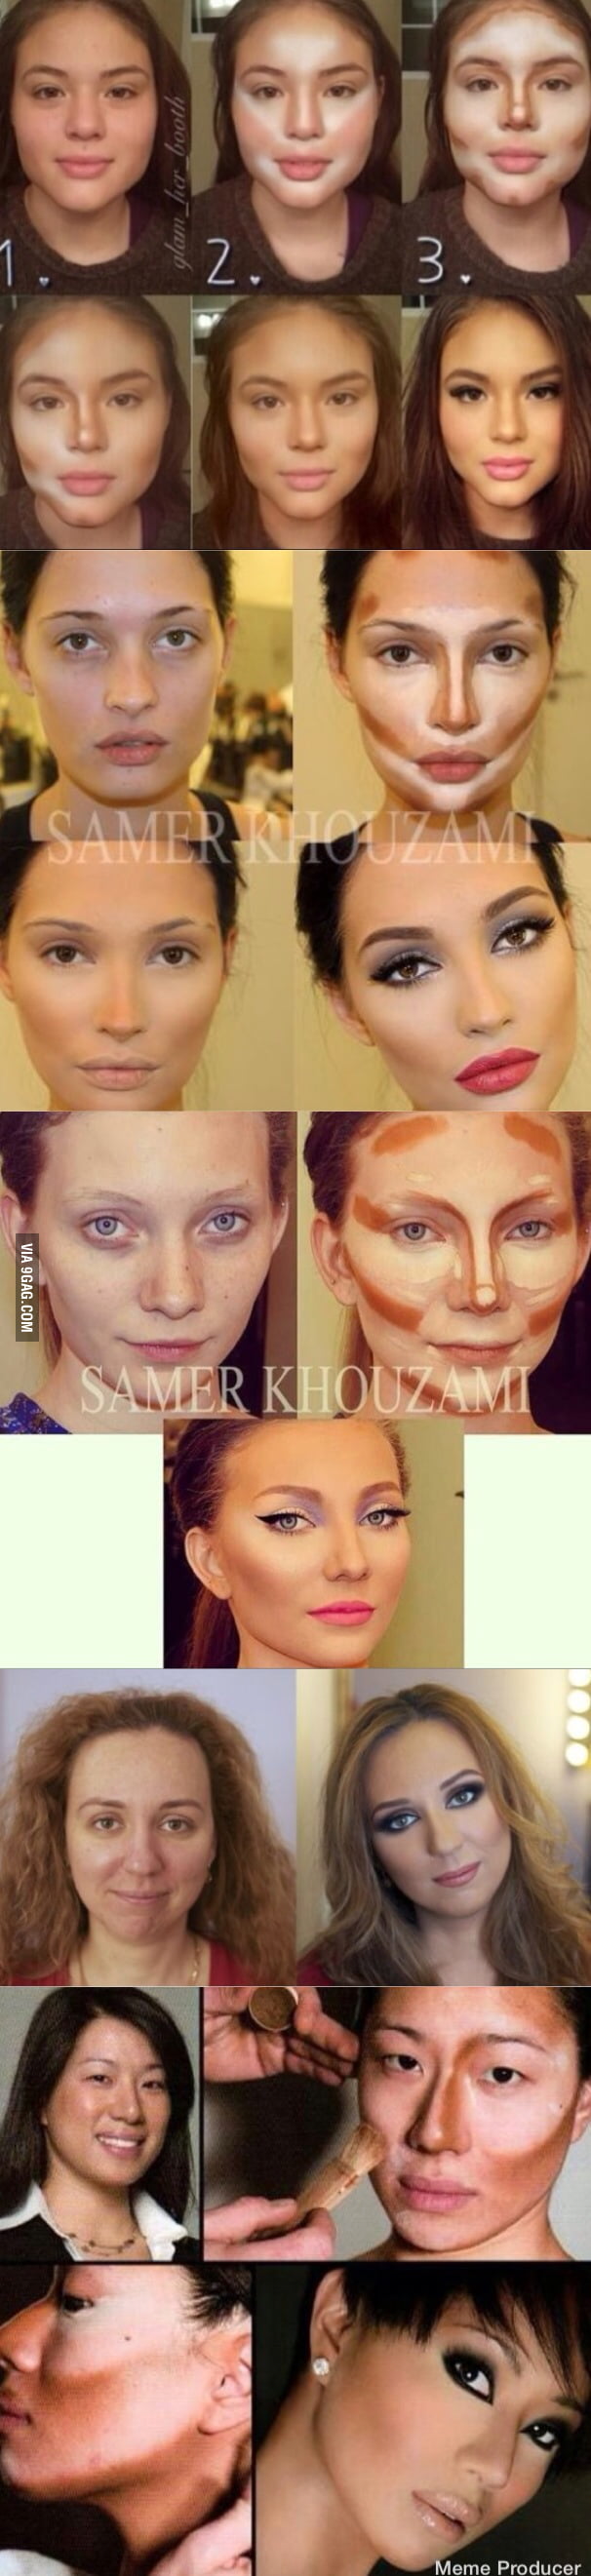 With or without make up, it's a big difference - 9GAG